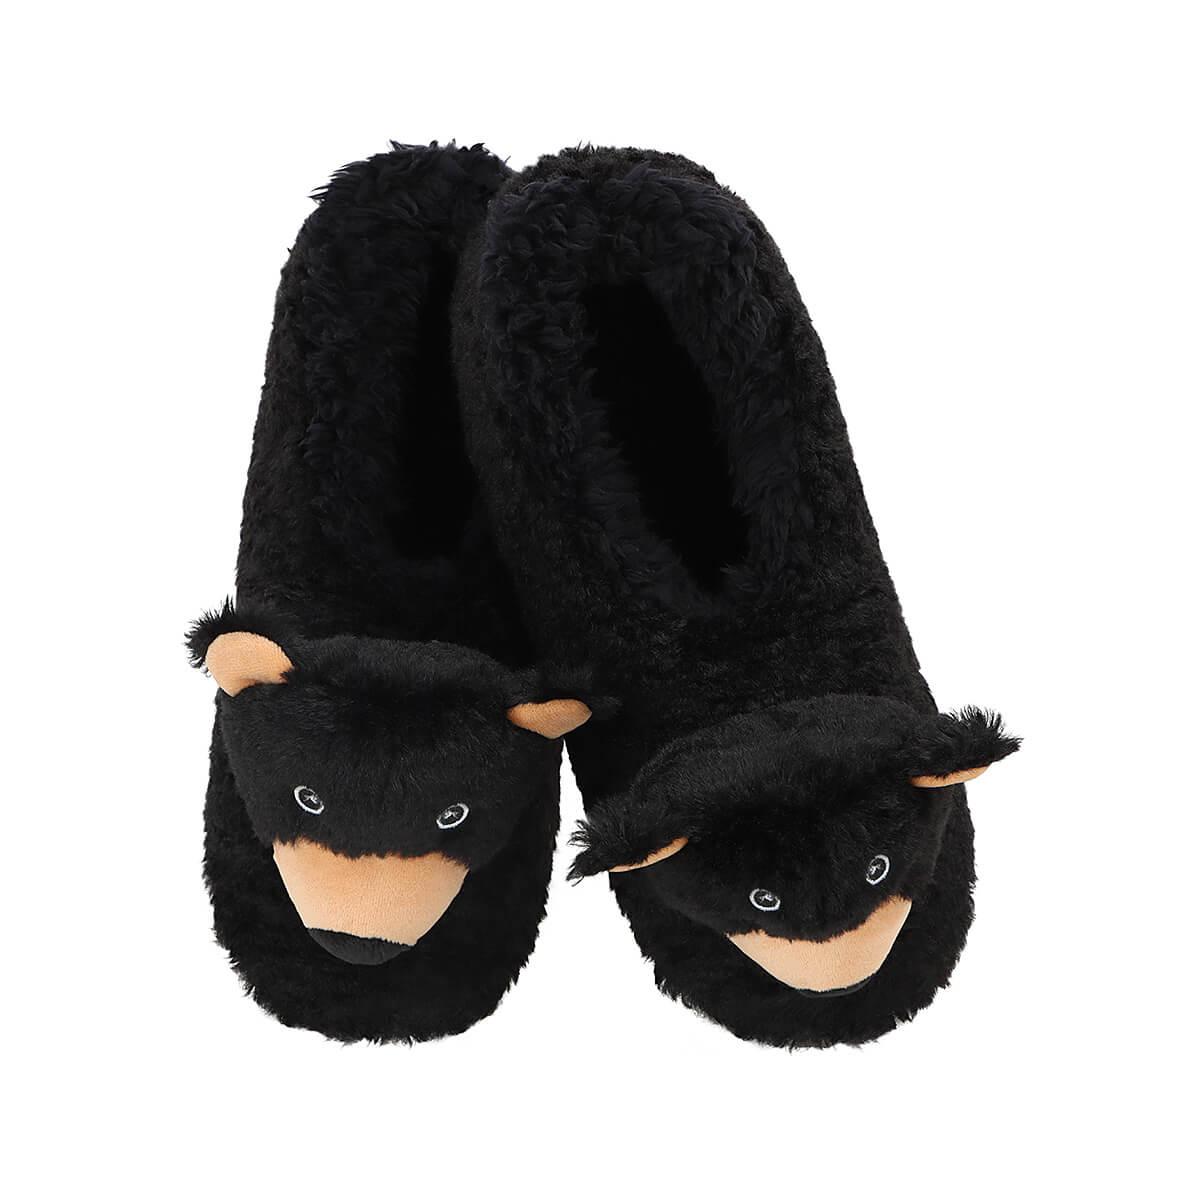 MENS BOYS NOVELTY FLUFFY WARM GIFT DOG FACE 3D SLIPPERS MULES BOOTS SIZE